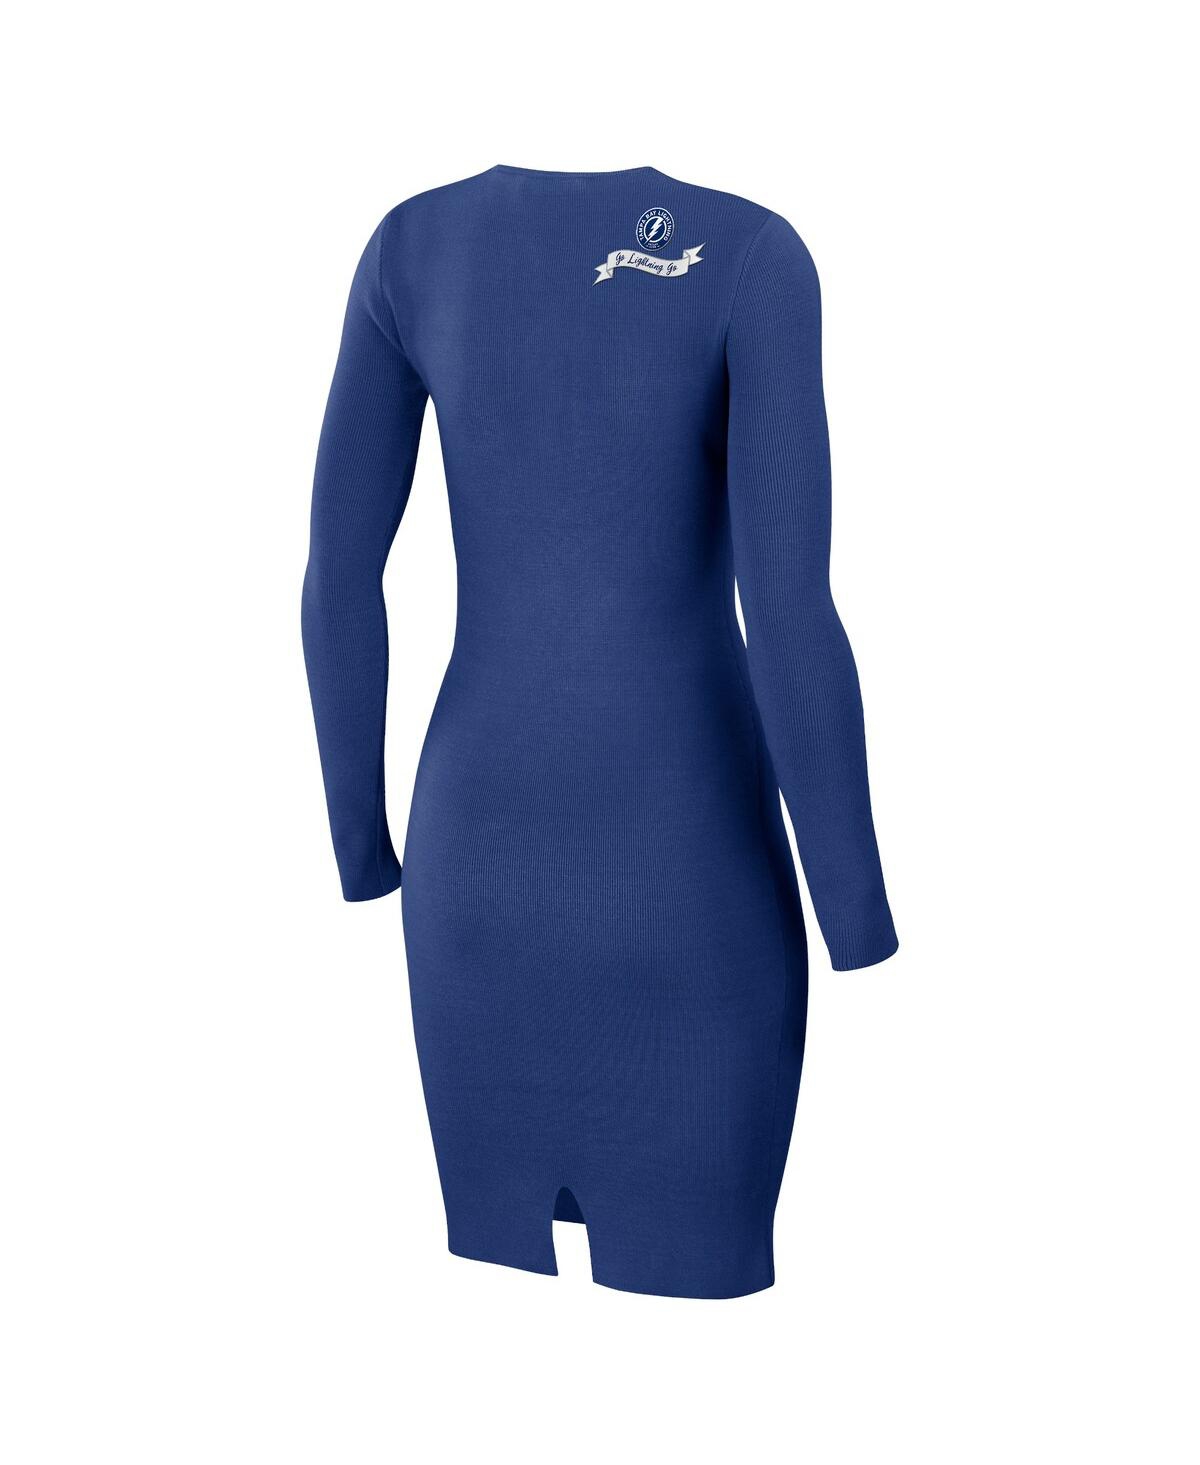 Shop Wear By Erin Andrews Women's  Blue Tampa Bay Lightning Lace-up Dress